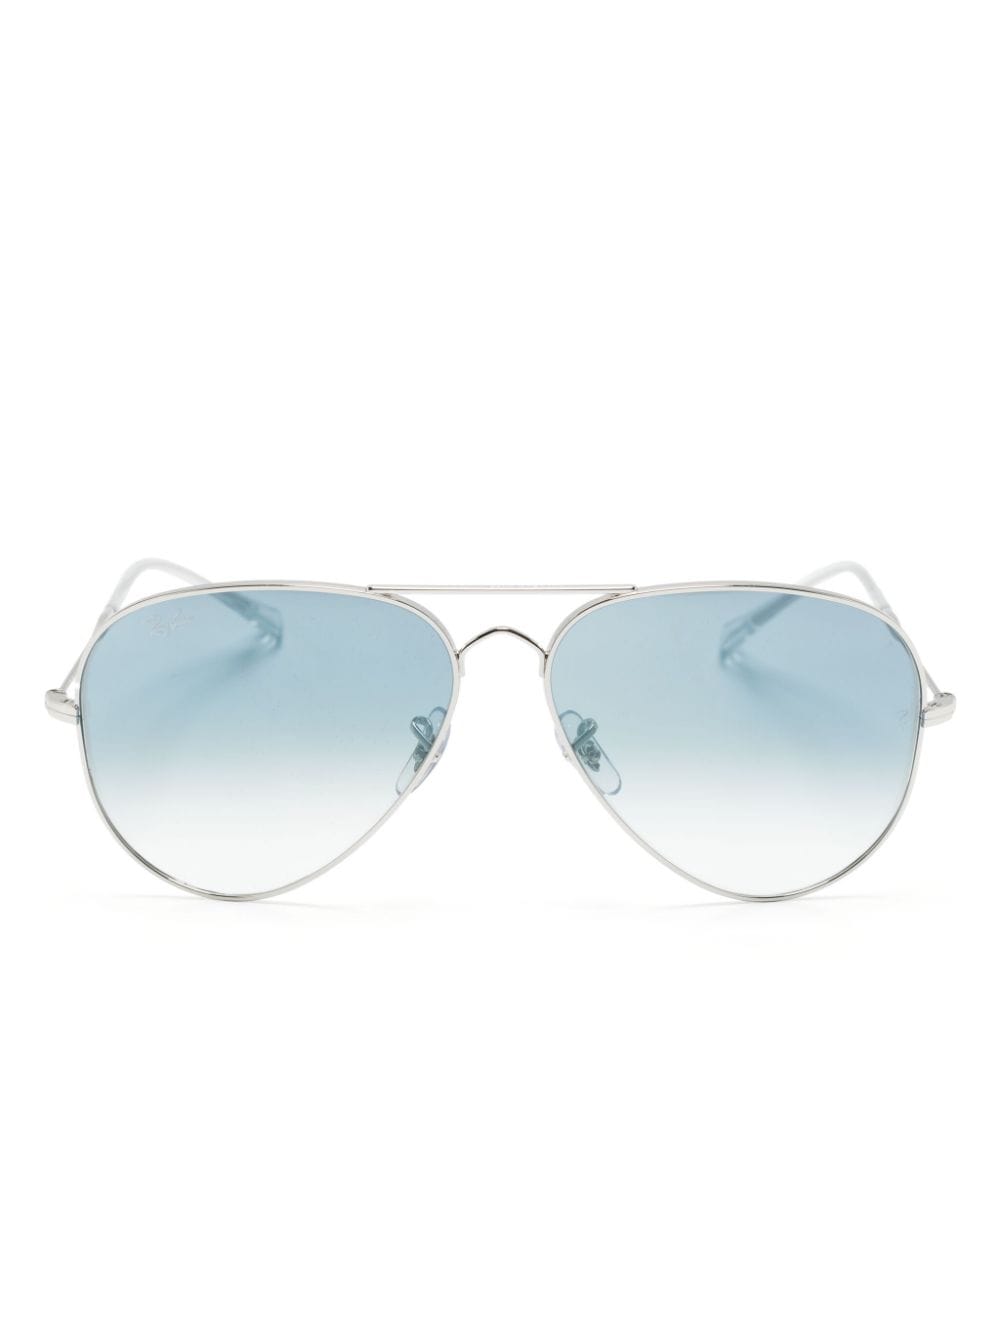 Ray Ban Old Aviator Sunglasses In Blue